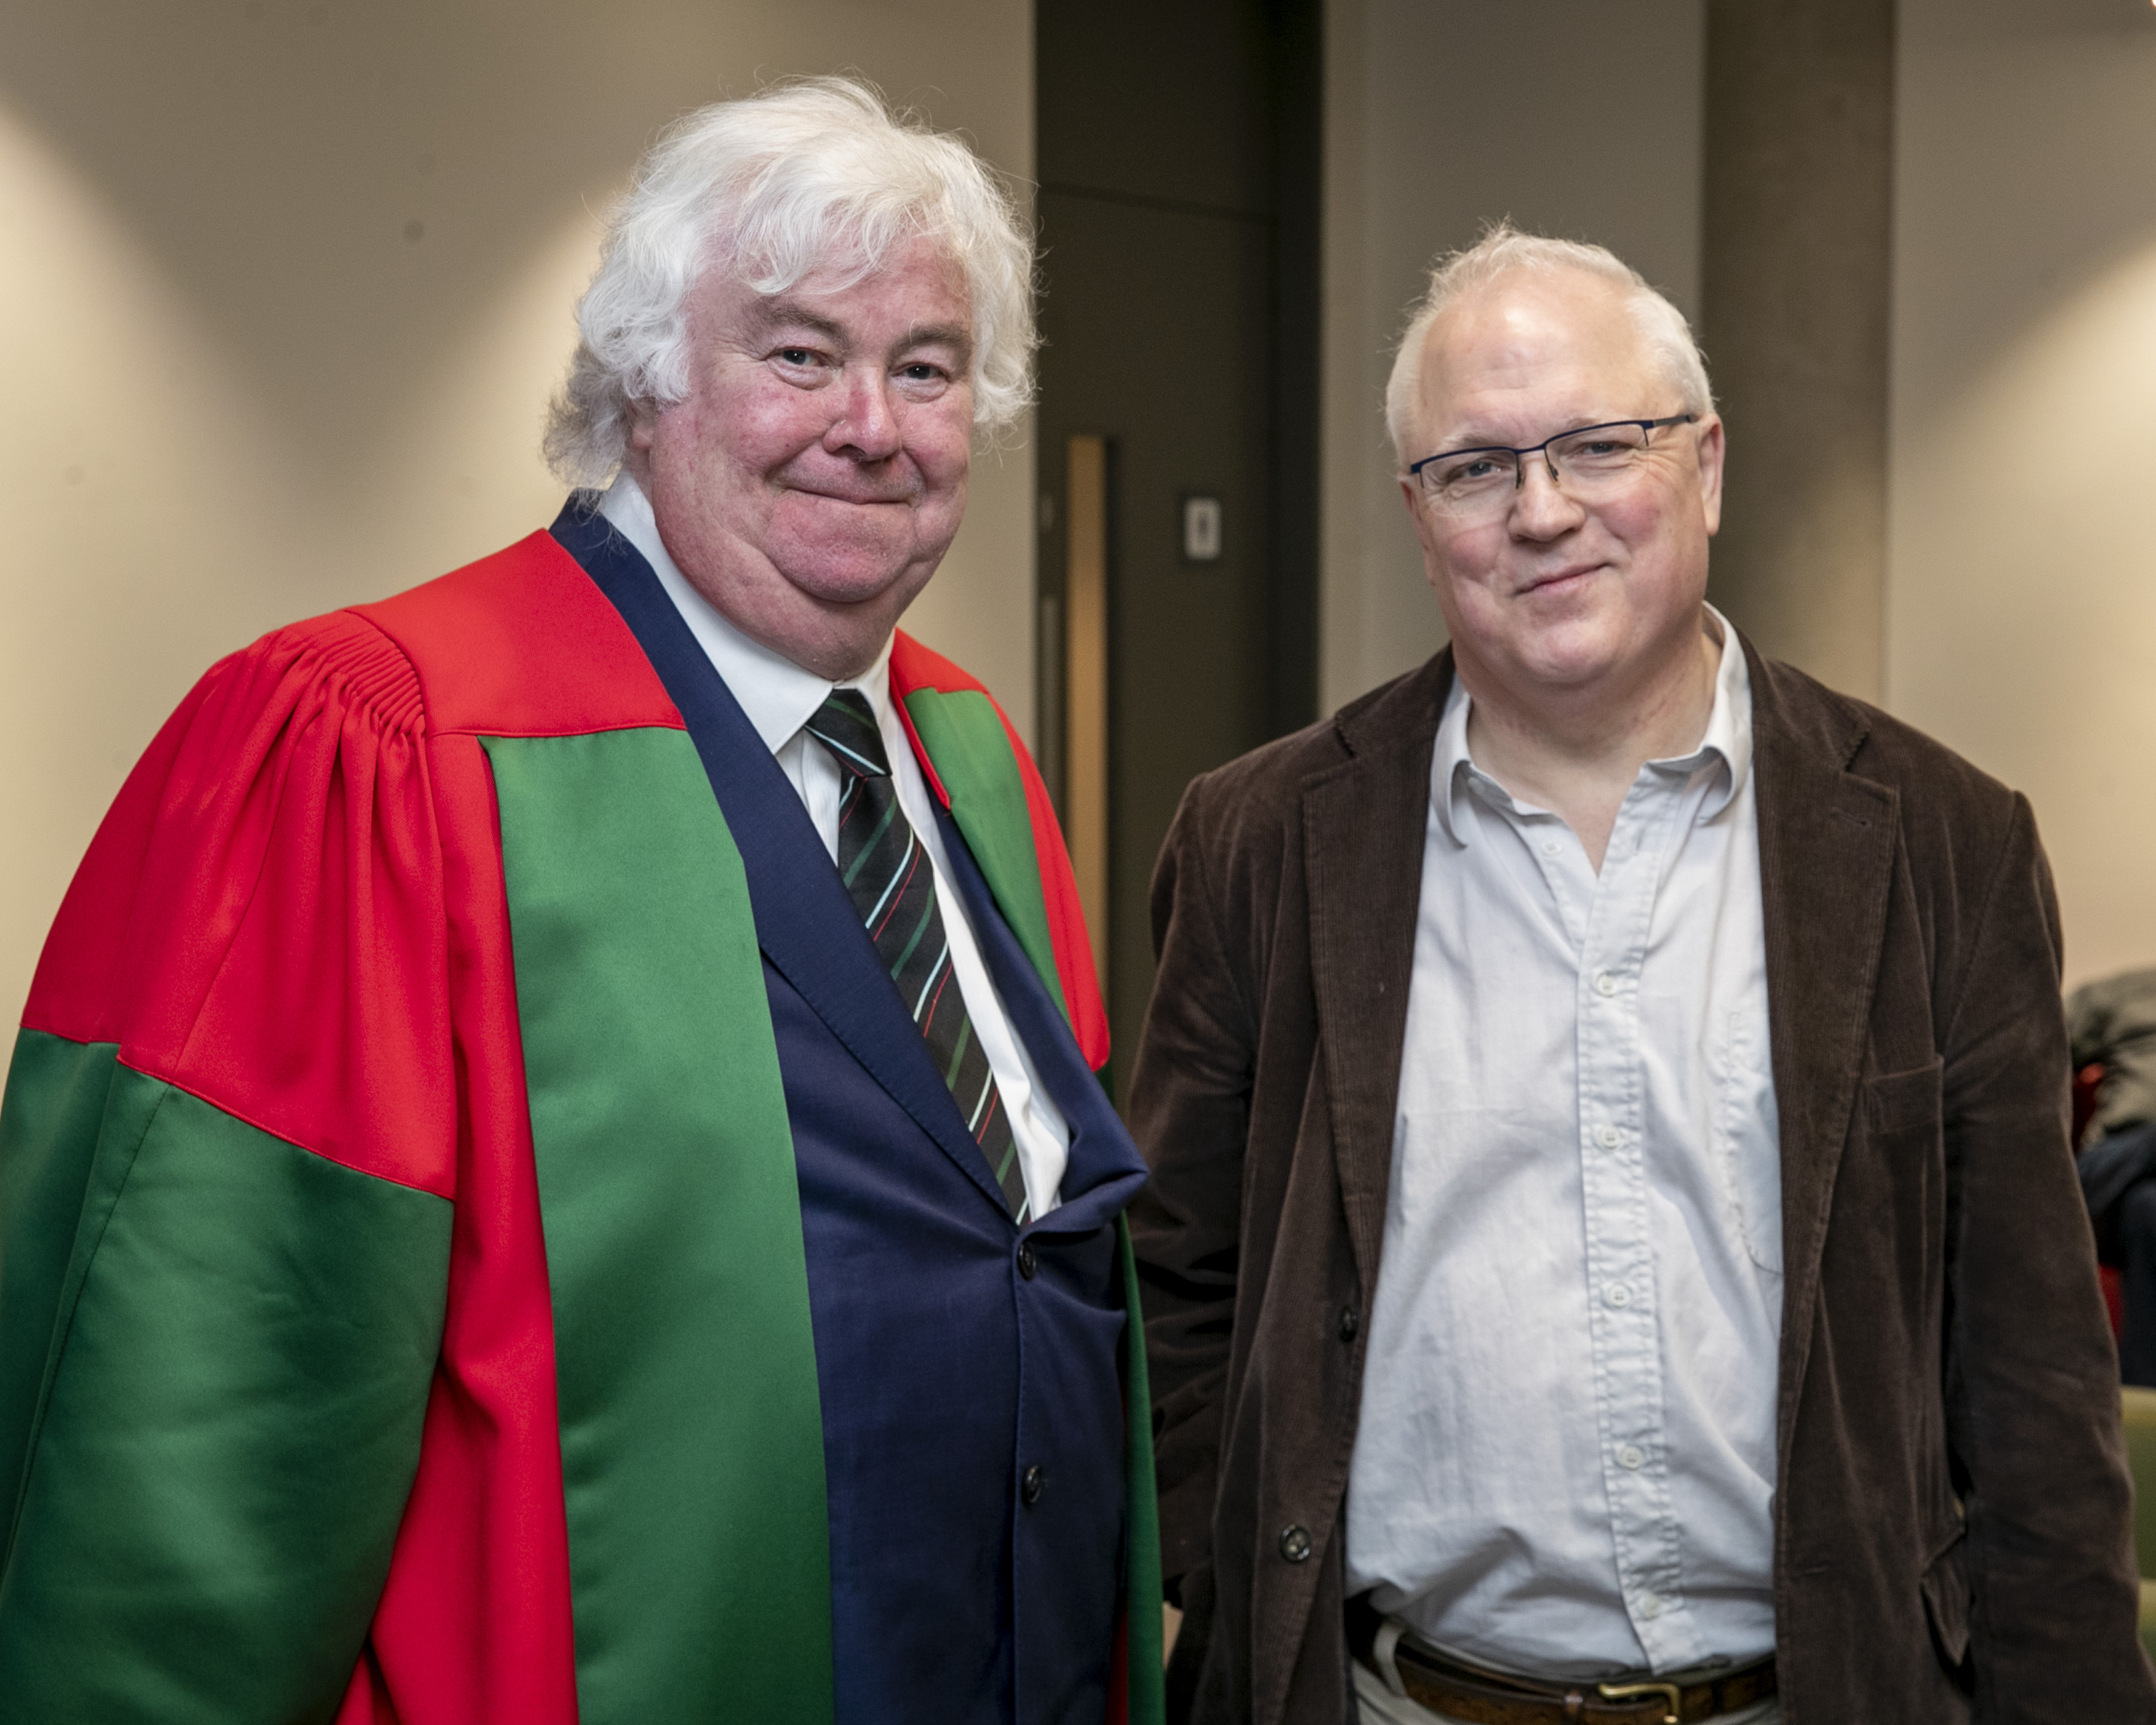 Chemistry Head of School, Mike Lyons attending the Inaugural lecture